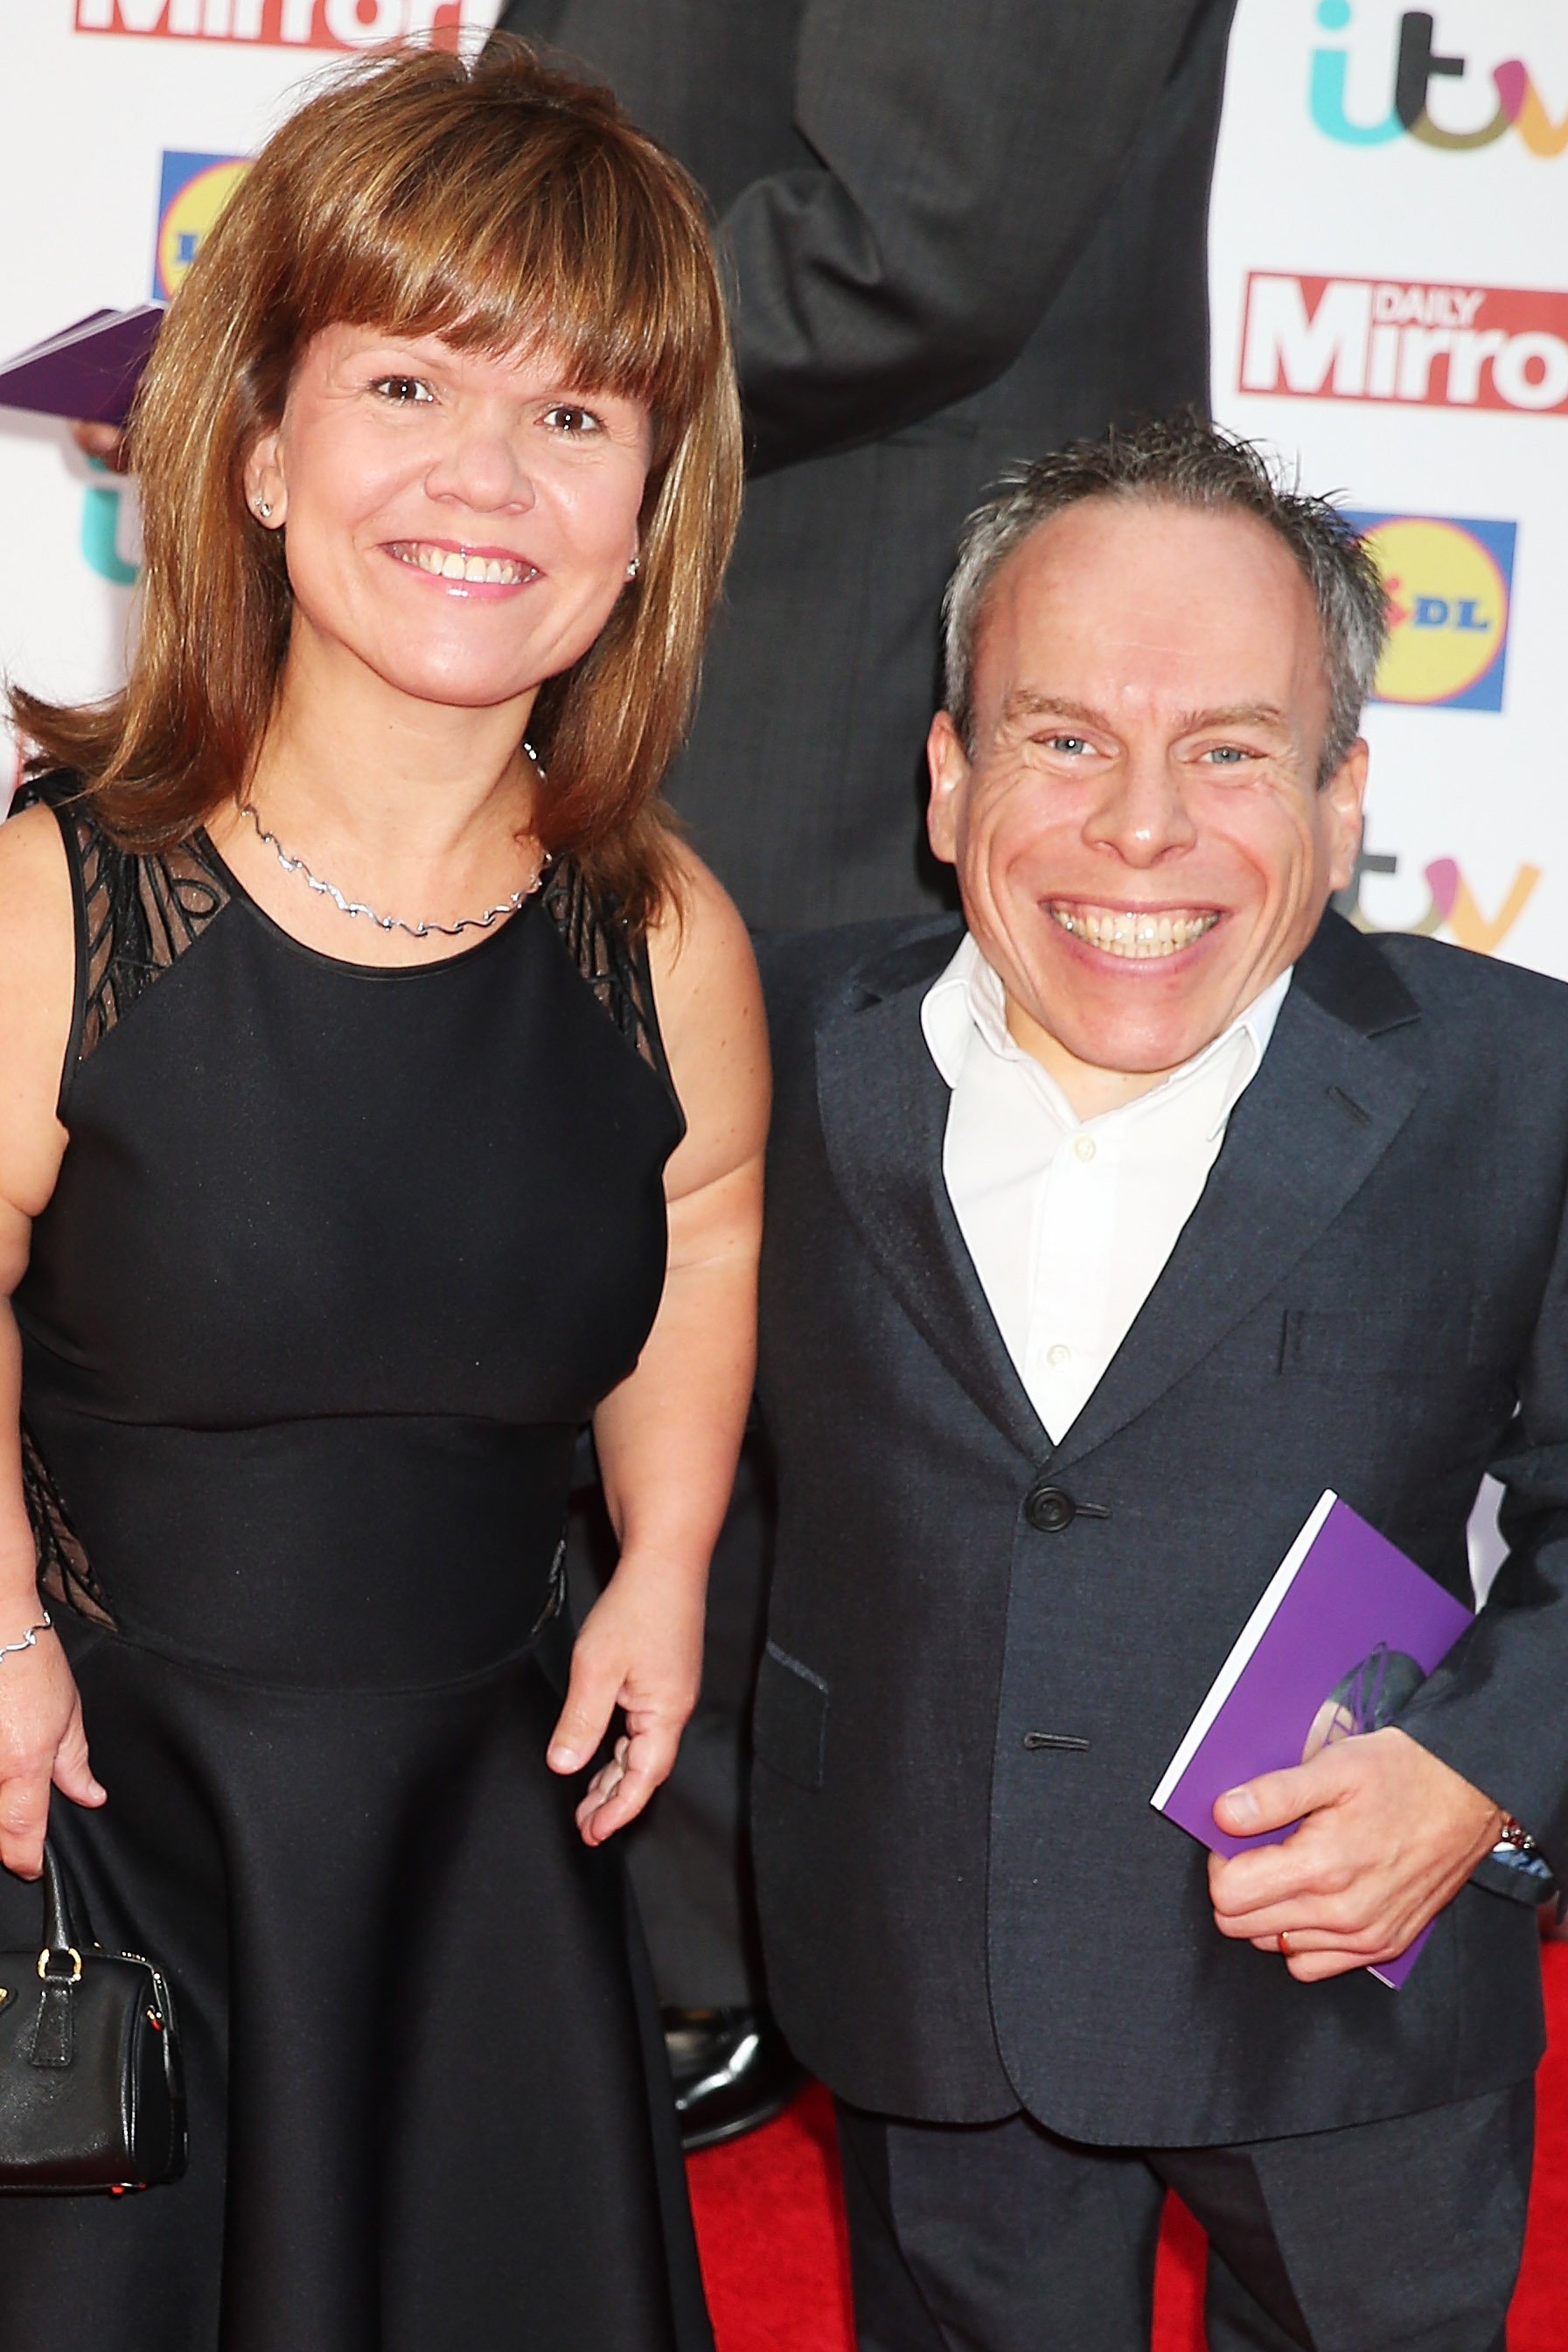 Warwick Davis (R) and Samantha Davis attend the Pride of Britain awards at The Grosvenor House Hotel on September 28, 2015 in London, England. | Source: Getty Images